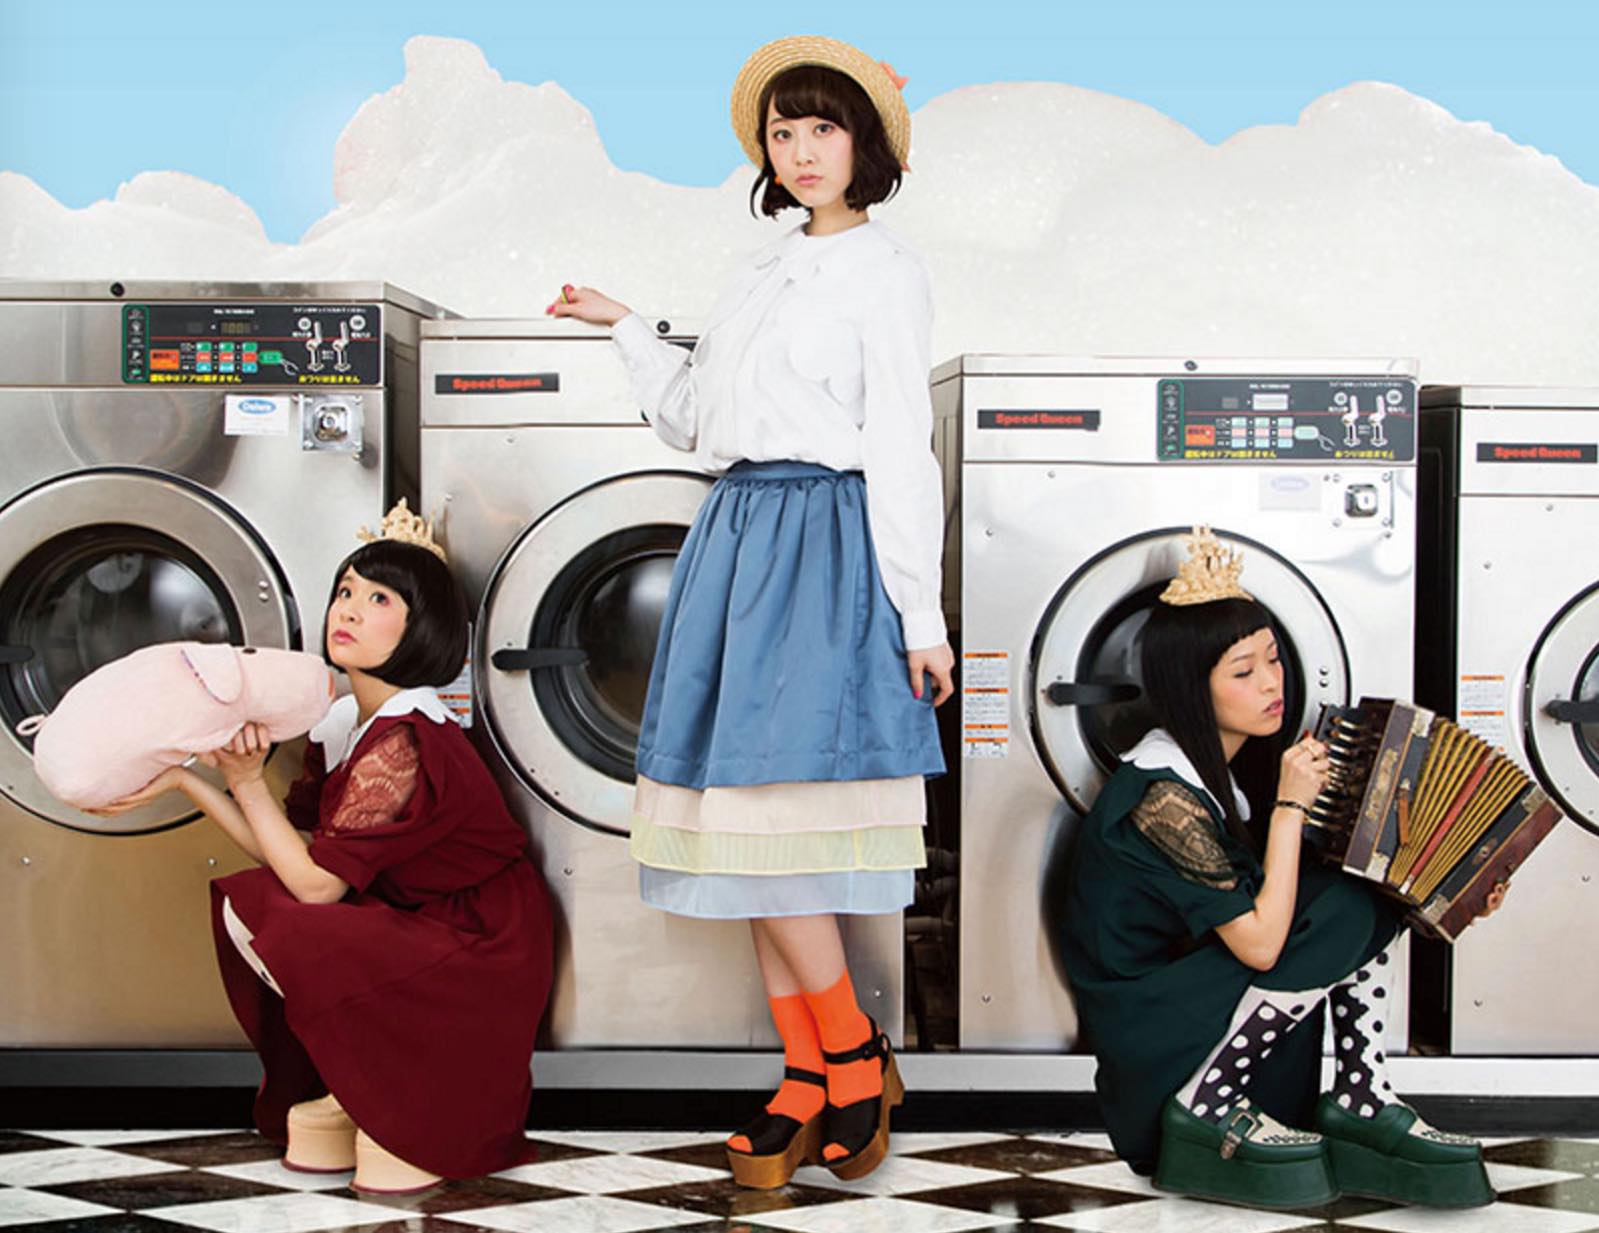 Rena Matsui to Charan Po Rantan Come Clean With the Visuals for Their Single “Shabon”!